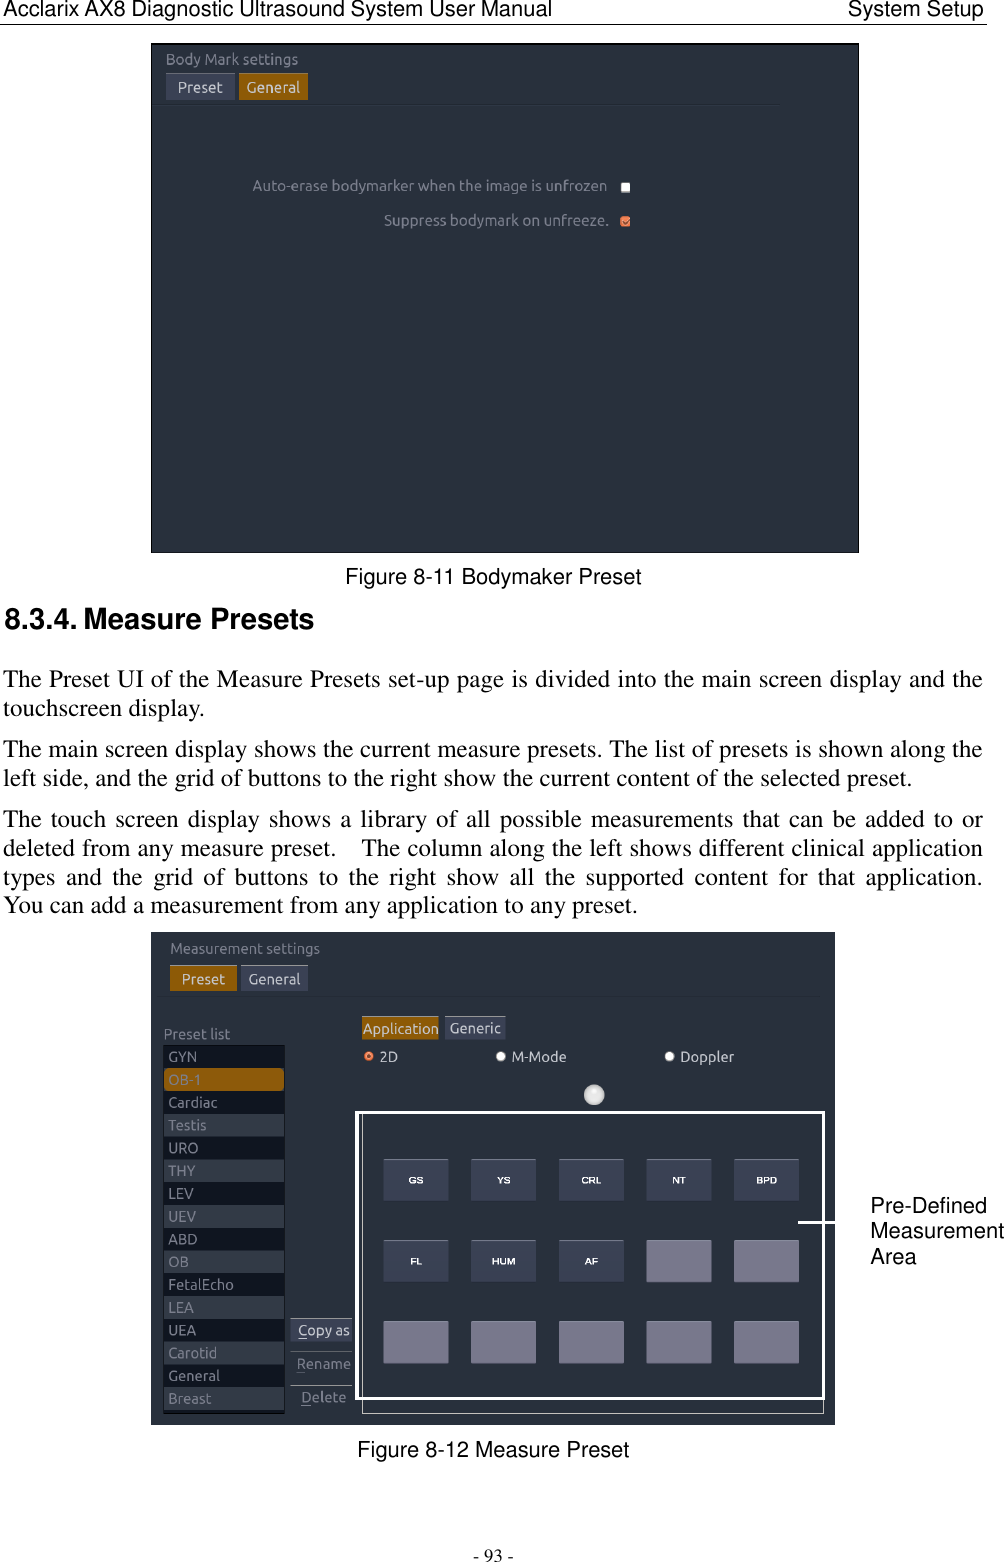 Acclarix AX8 Diagnostic Ultrasound System User Manual                                                      System Setup - 93 -  Figure 8-11 Bodymaker Preset   8.3.4. Measure Presets The Preset UI of the Measure Presets set-up page is divided into the main screen display and the touchscreen display.     The main screen display shows the current measure presets. The list of presets is shown along the left side, and the grid of buttons to the right show the current content of the selected preset.     The touch screen display shows a library of all possible measurements that can be added to or deleted from any measure preset.    The column along the left shows different clinical application types  and  the  grid  of  buttons  to  the  right  show  all  the  supported  content  for  that  application.   You can add a measurement from any application to any preset.        Figure 8-12 Measure Preset  Pre-Defined Measurement Area 